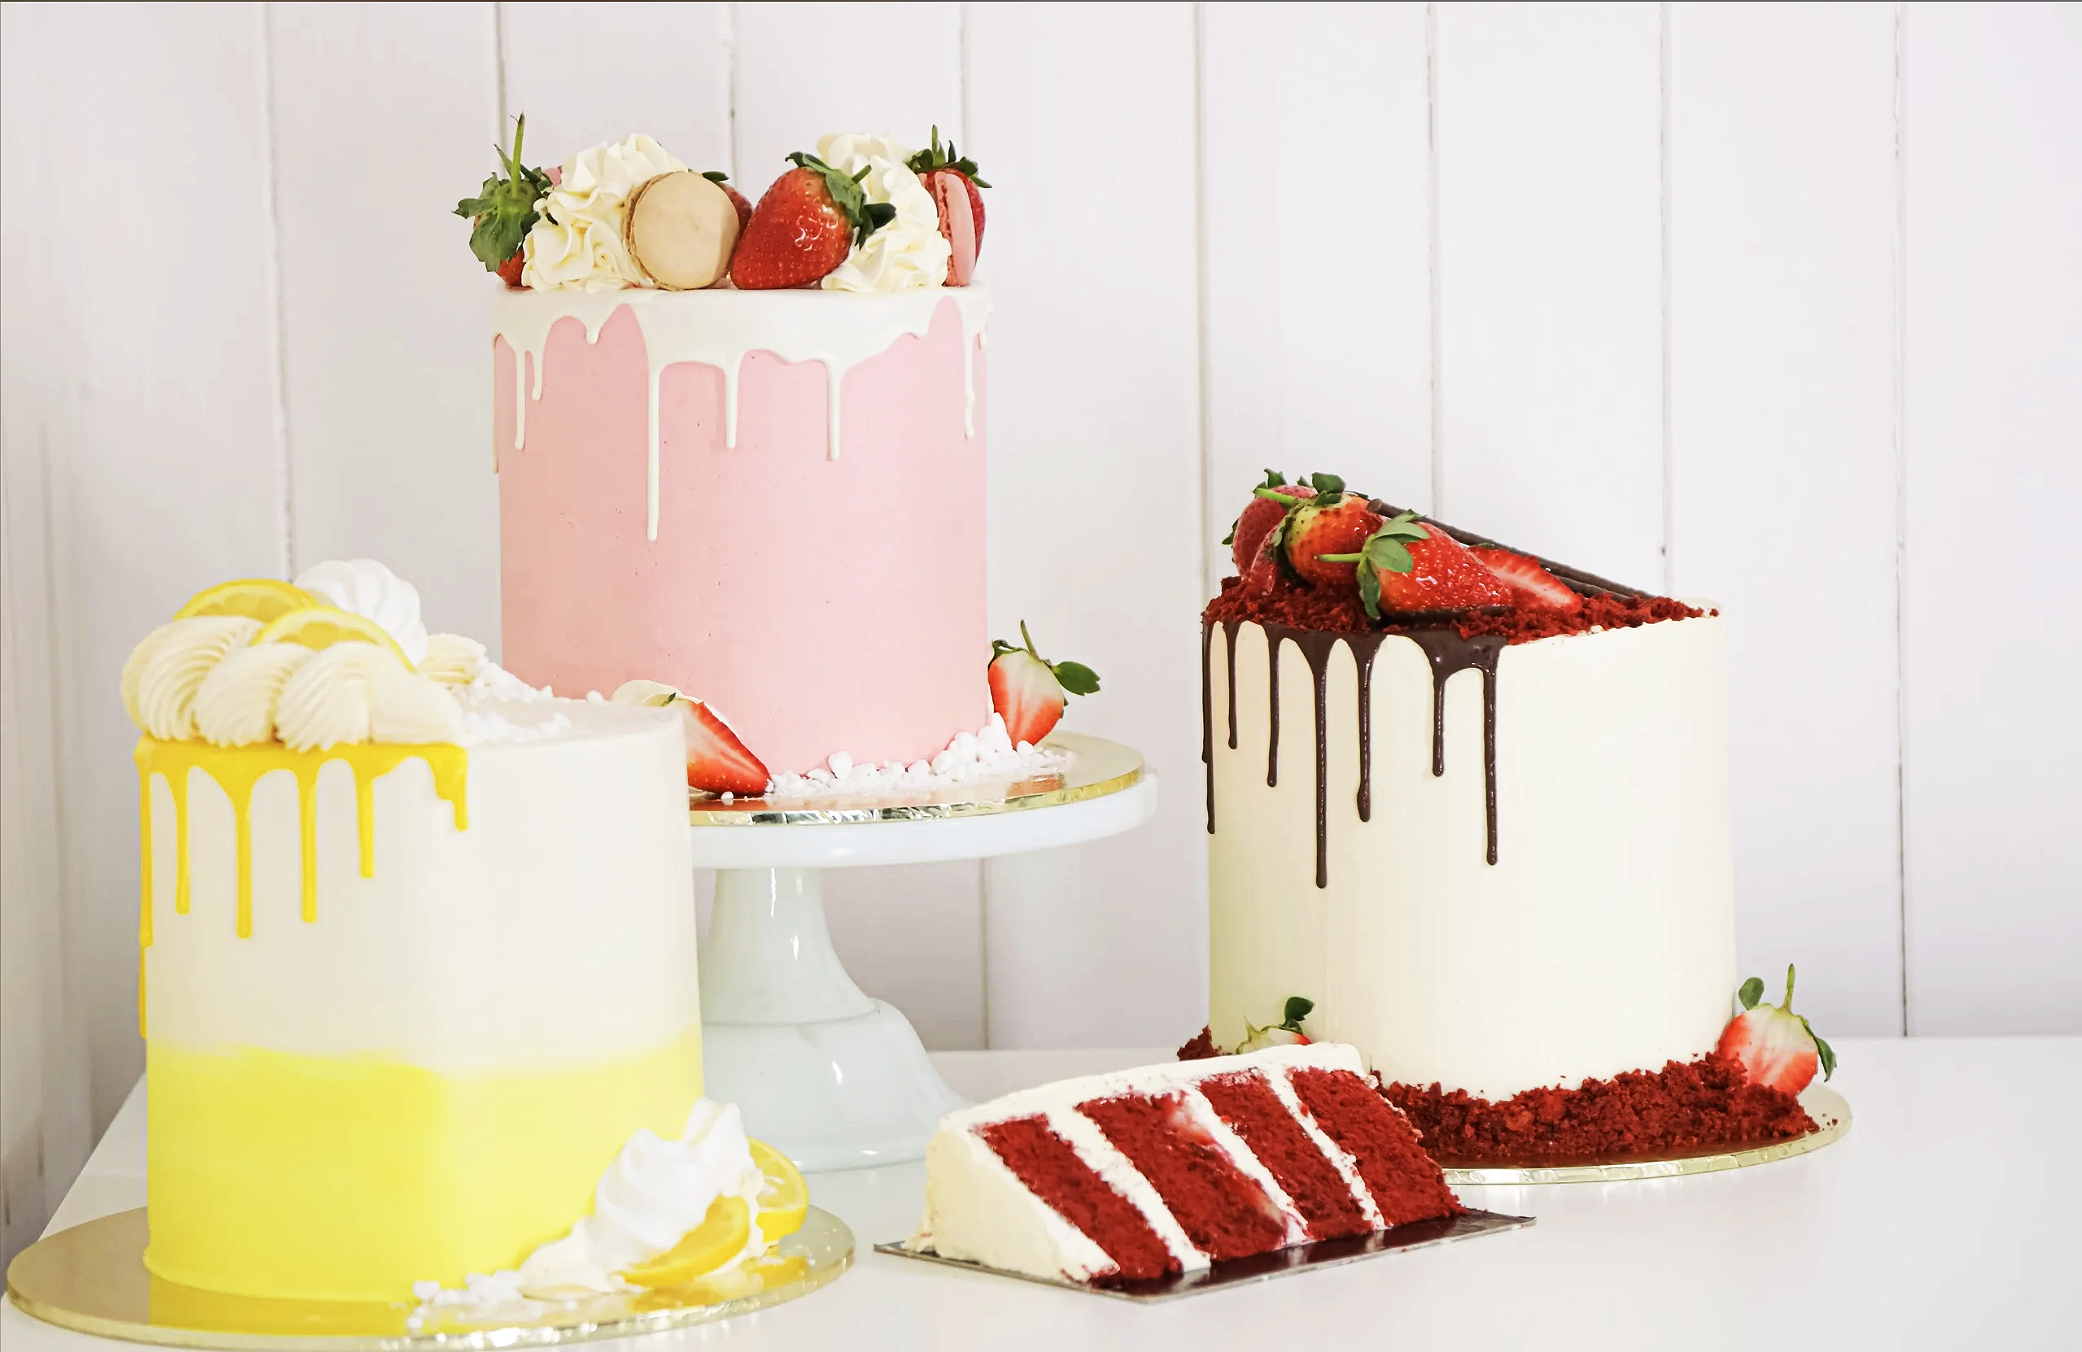 Buy Cakes Online at the Jack and Beyond Online Cake Shop